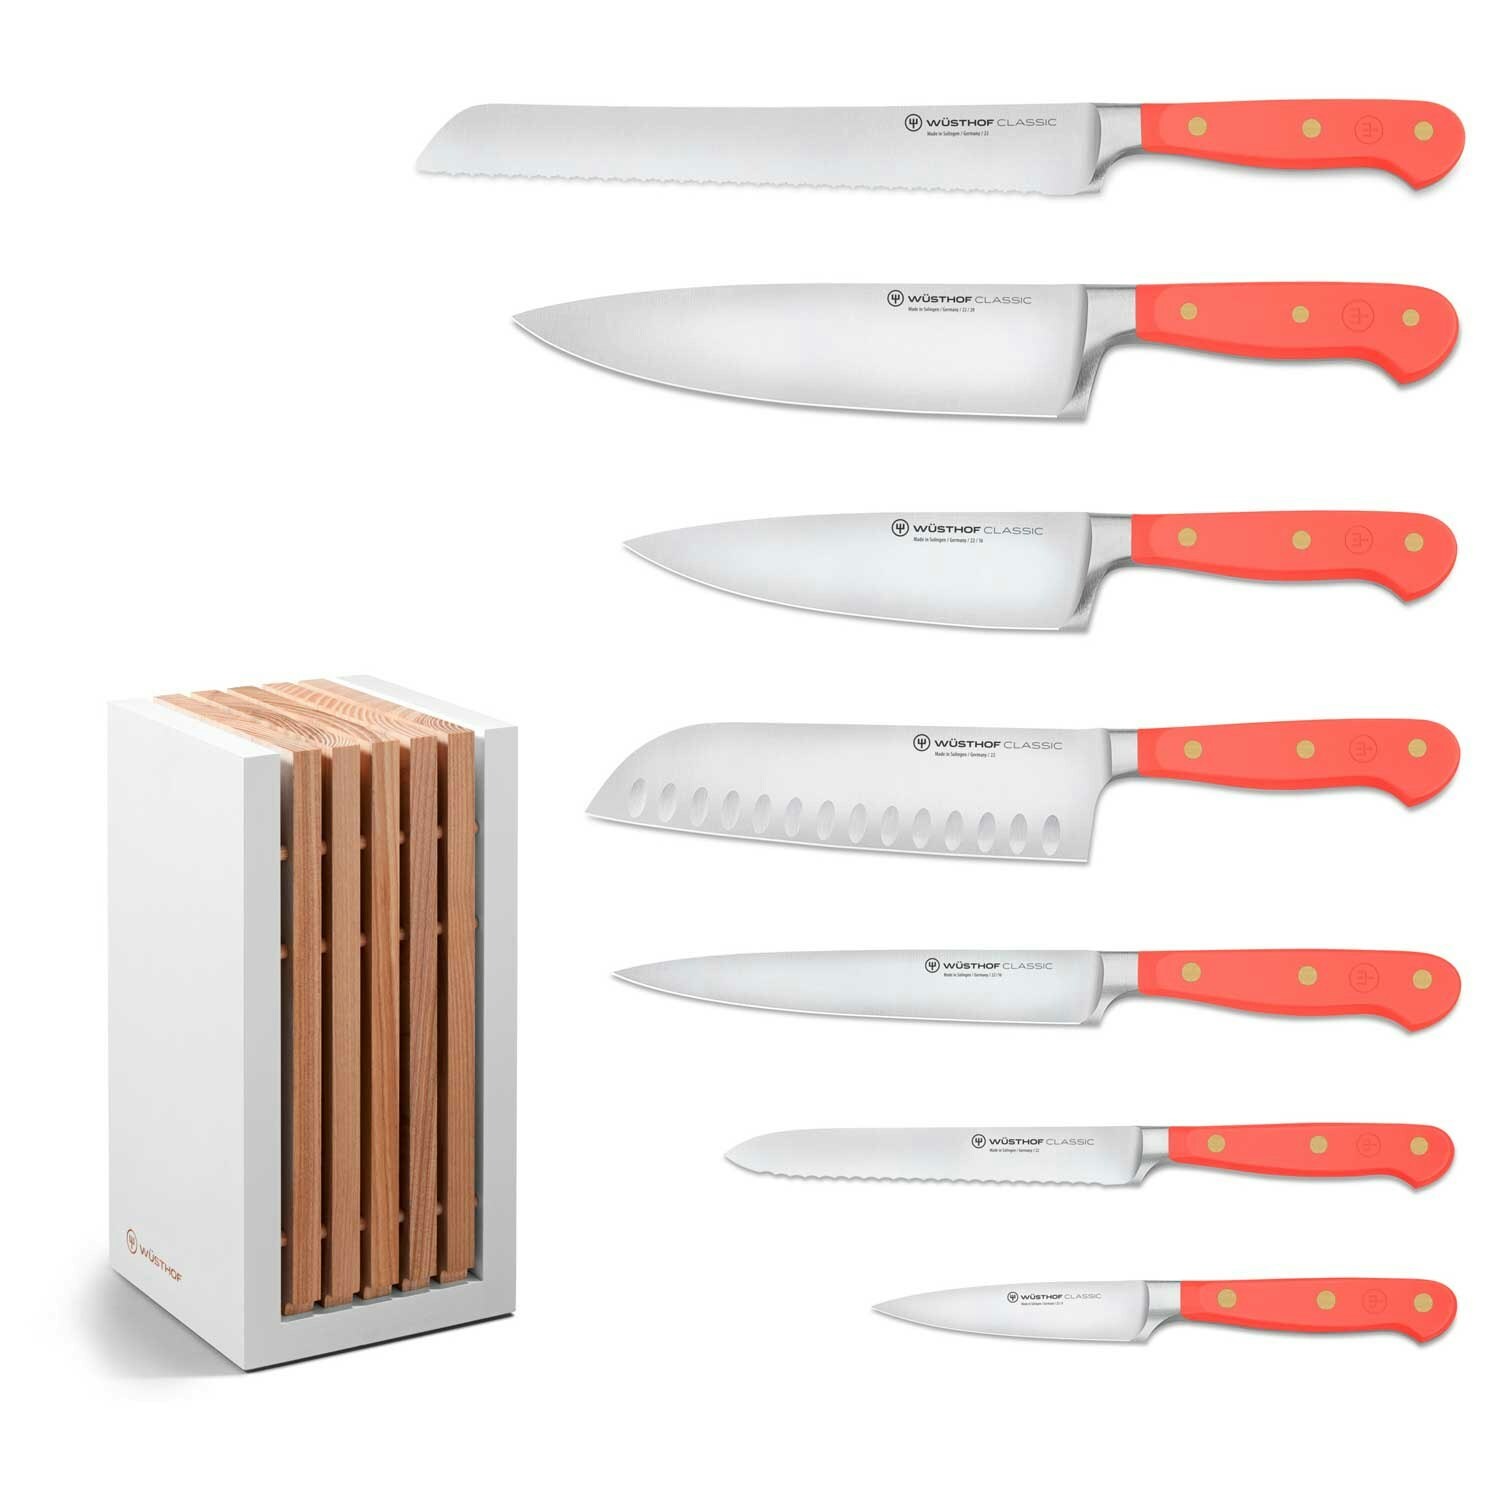 Wusthof Classic 14-piece Knife Set With Block for sale online